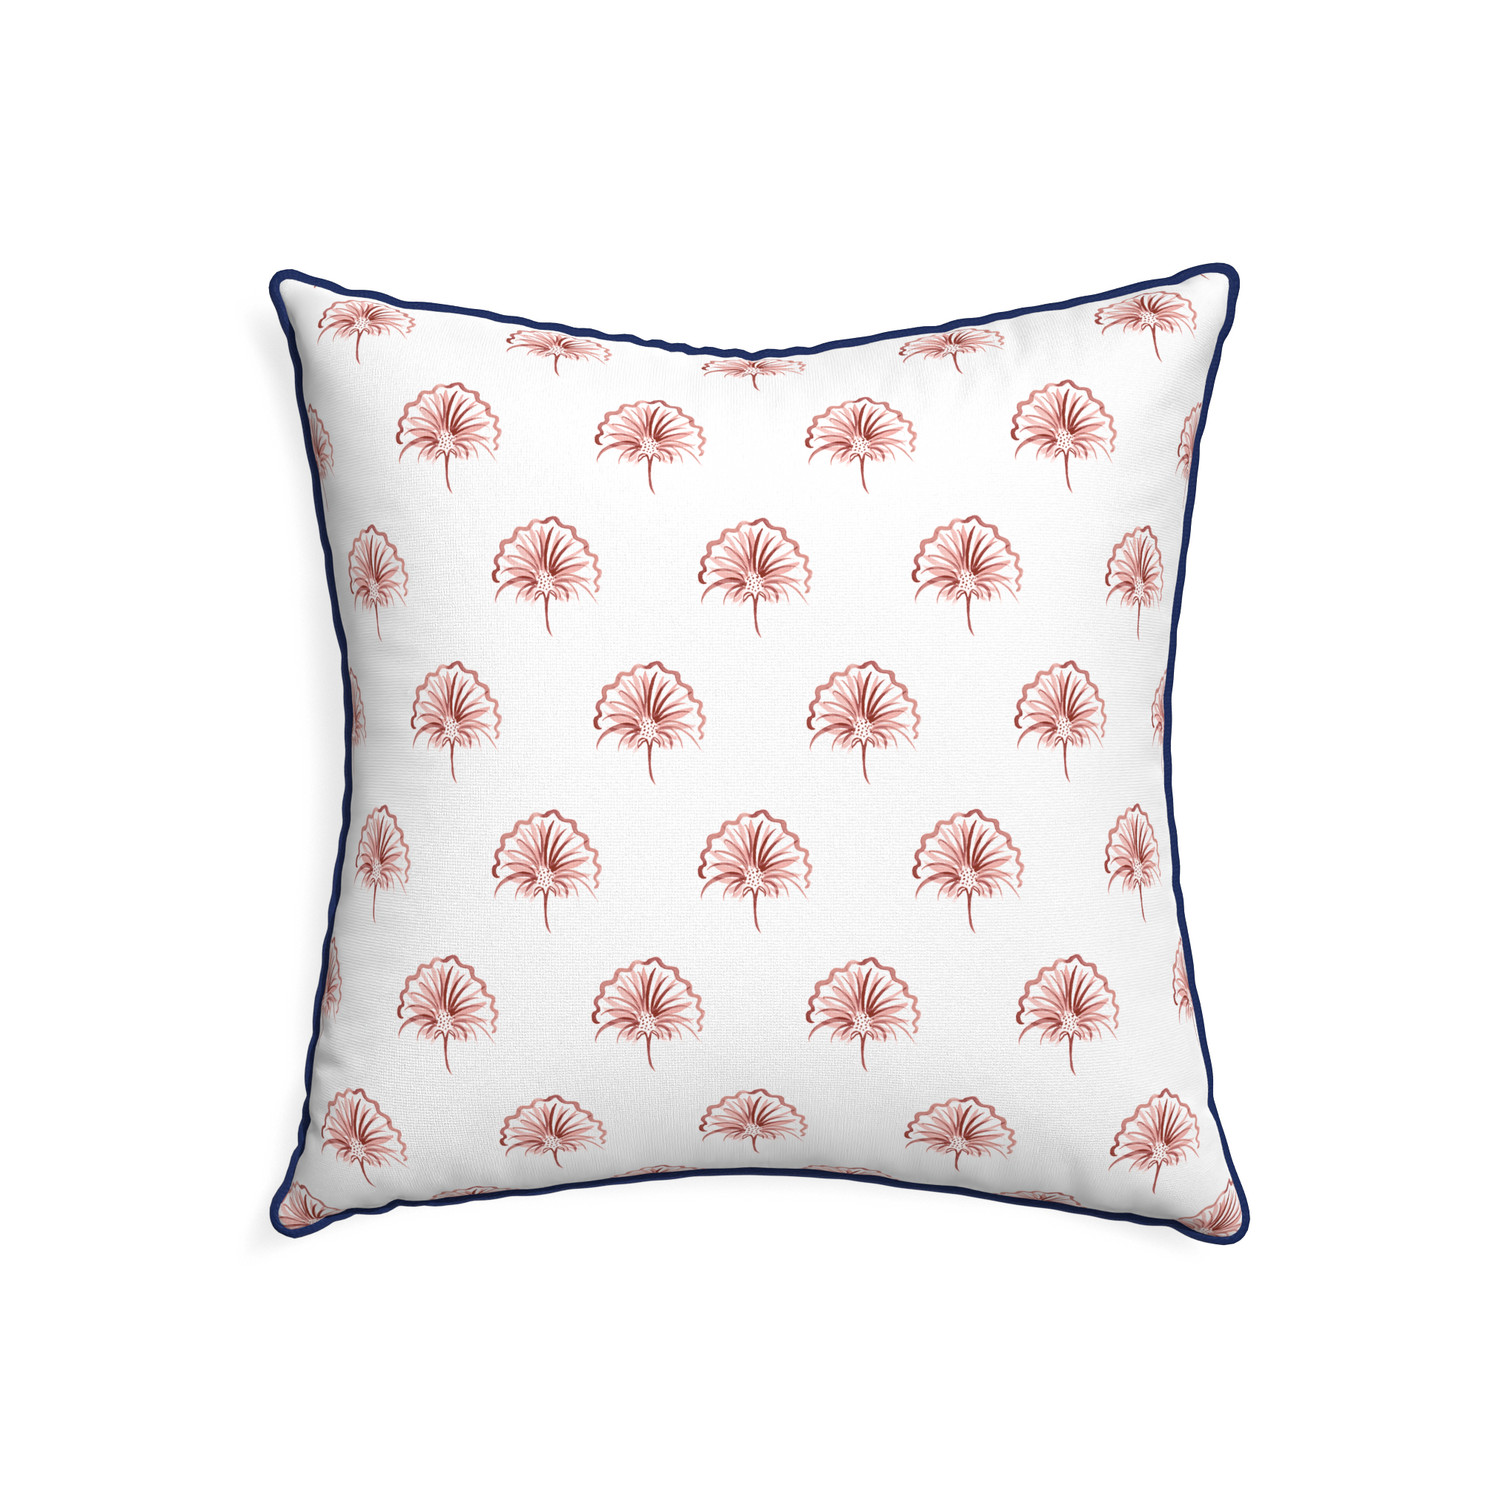 22-square penelope rose custom floral pinkpillow with midnight piping on white background